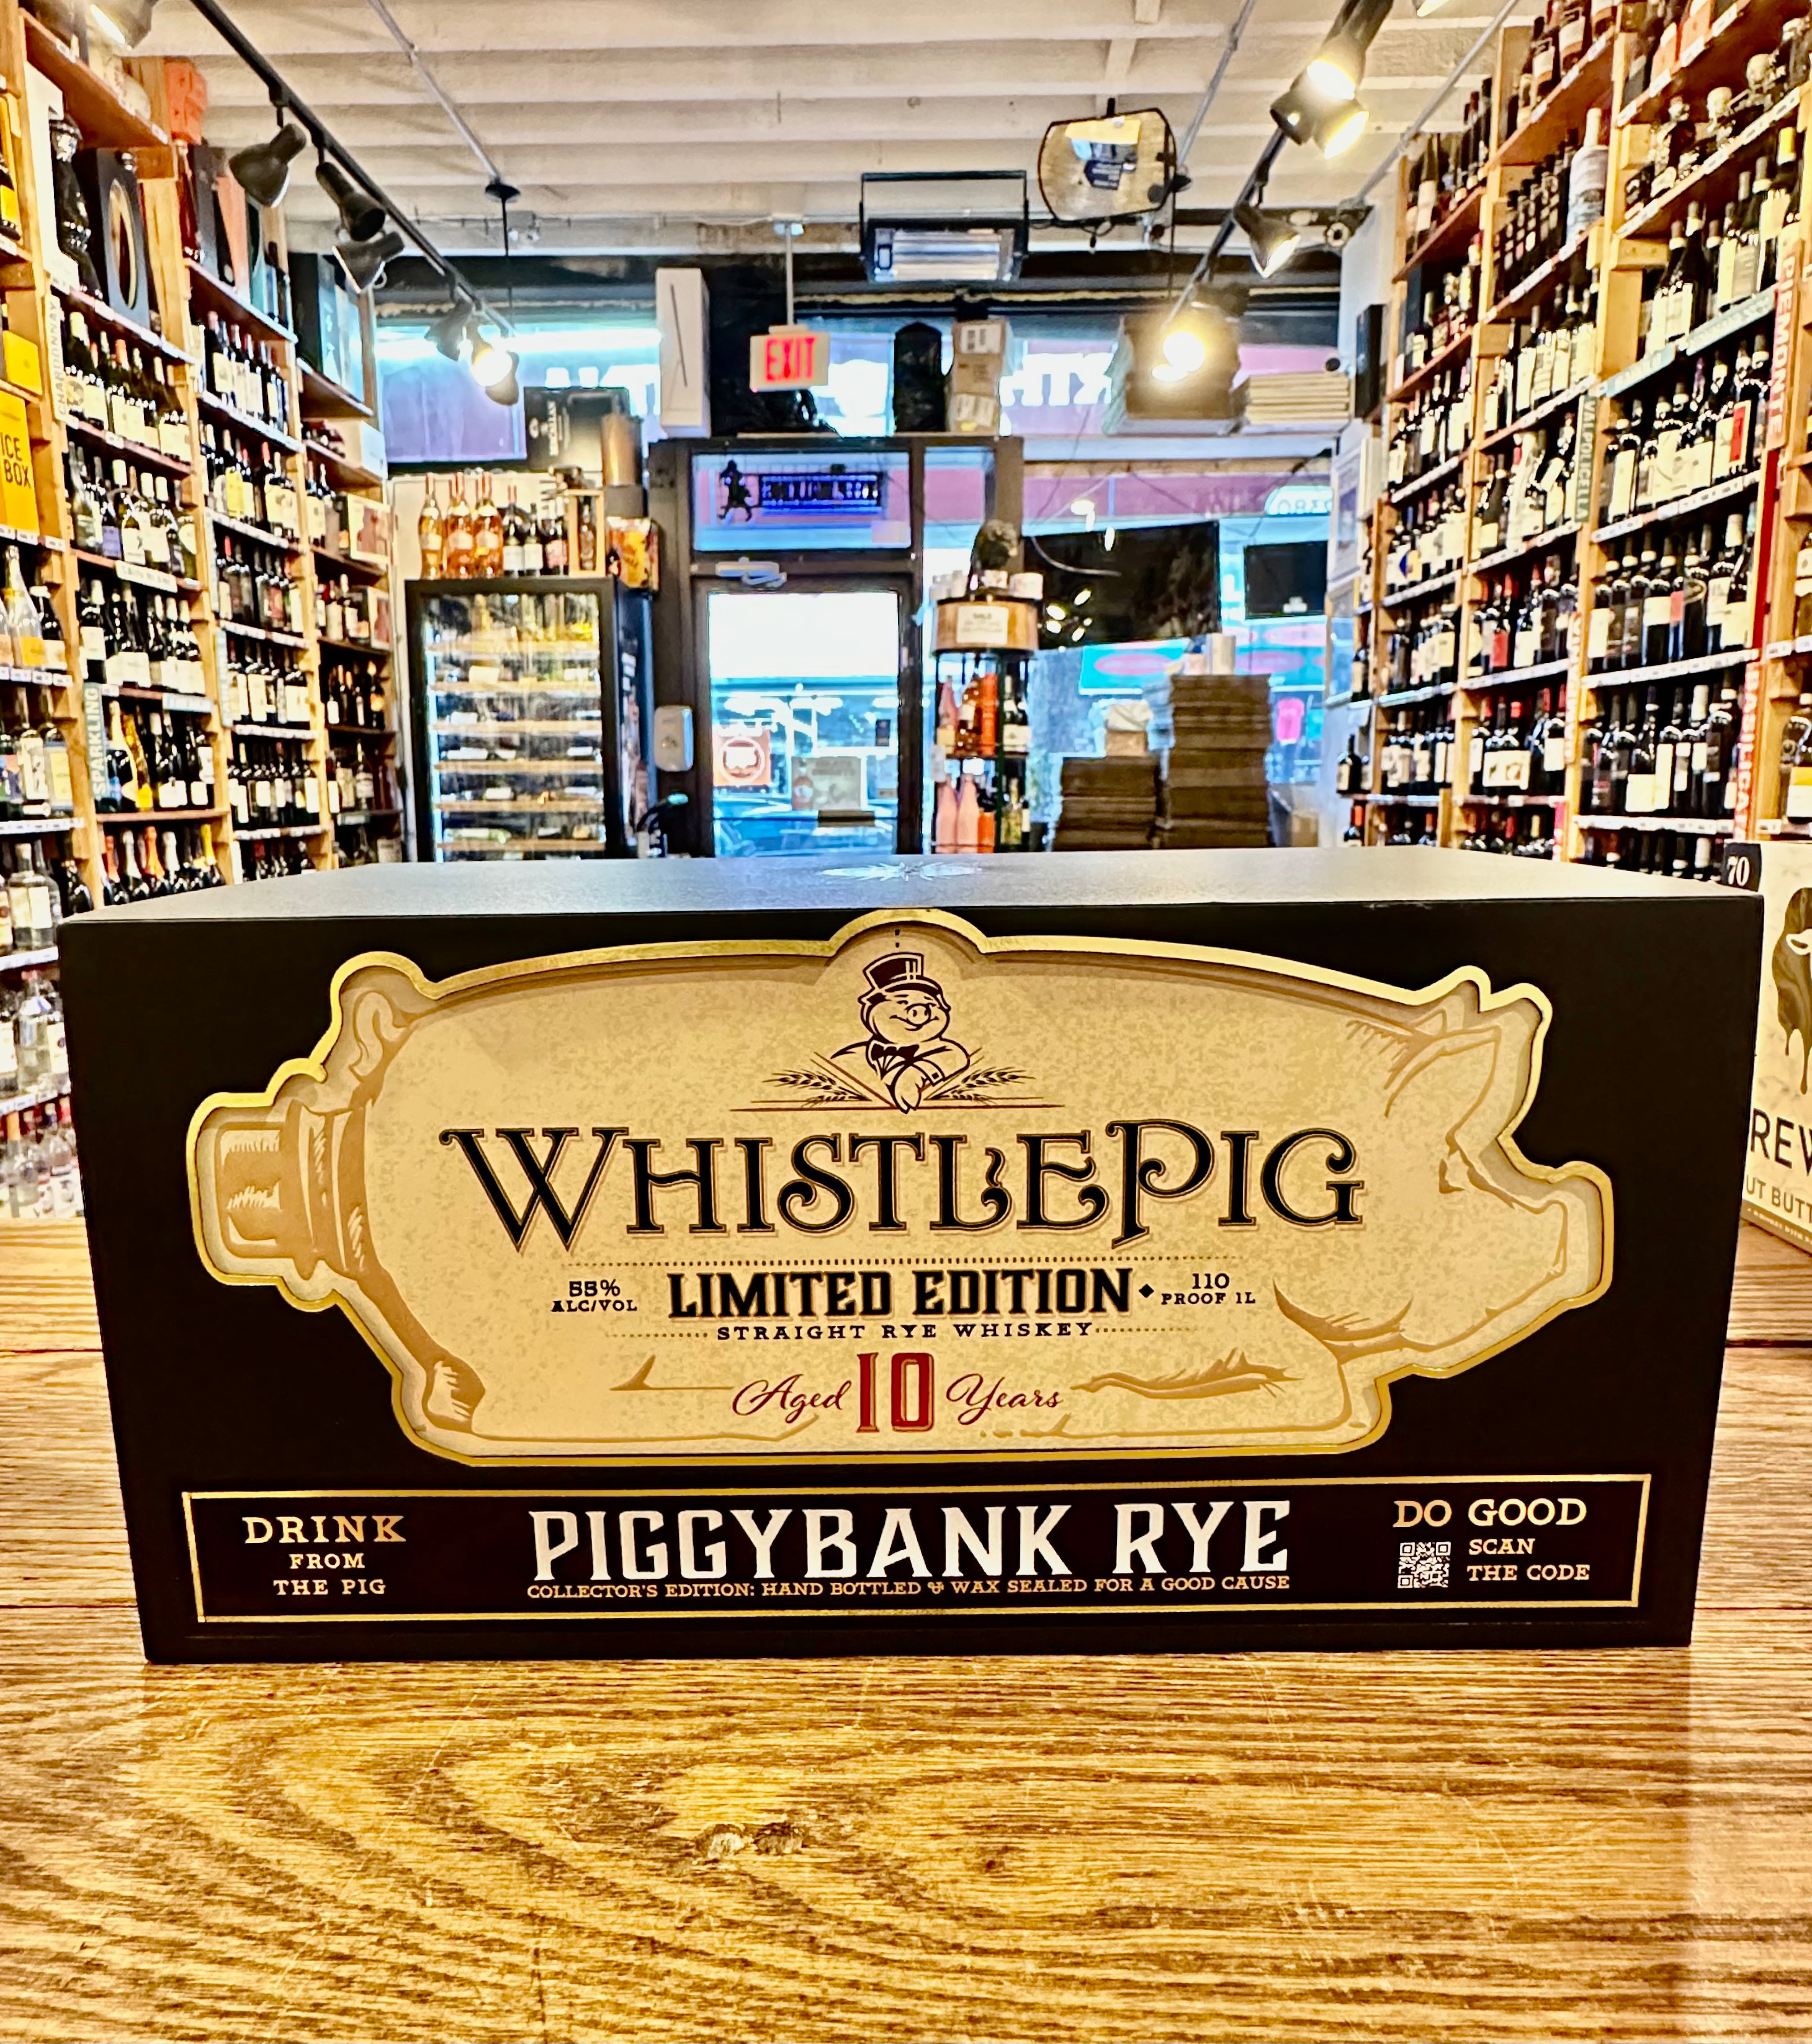 Whistle Pig Piggybank Rye 1L a rectangle shaped black and beige box with an image of a pig on the front